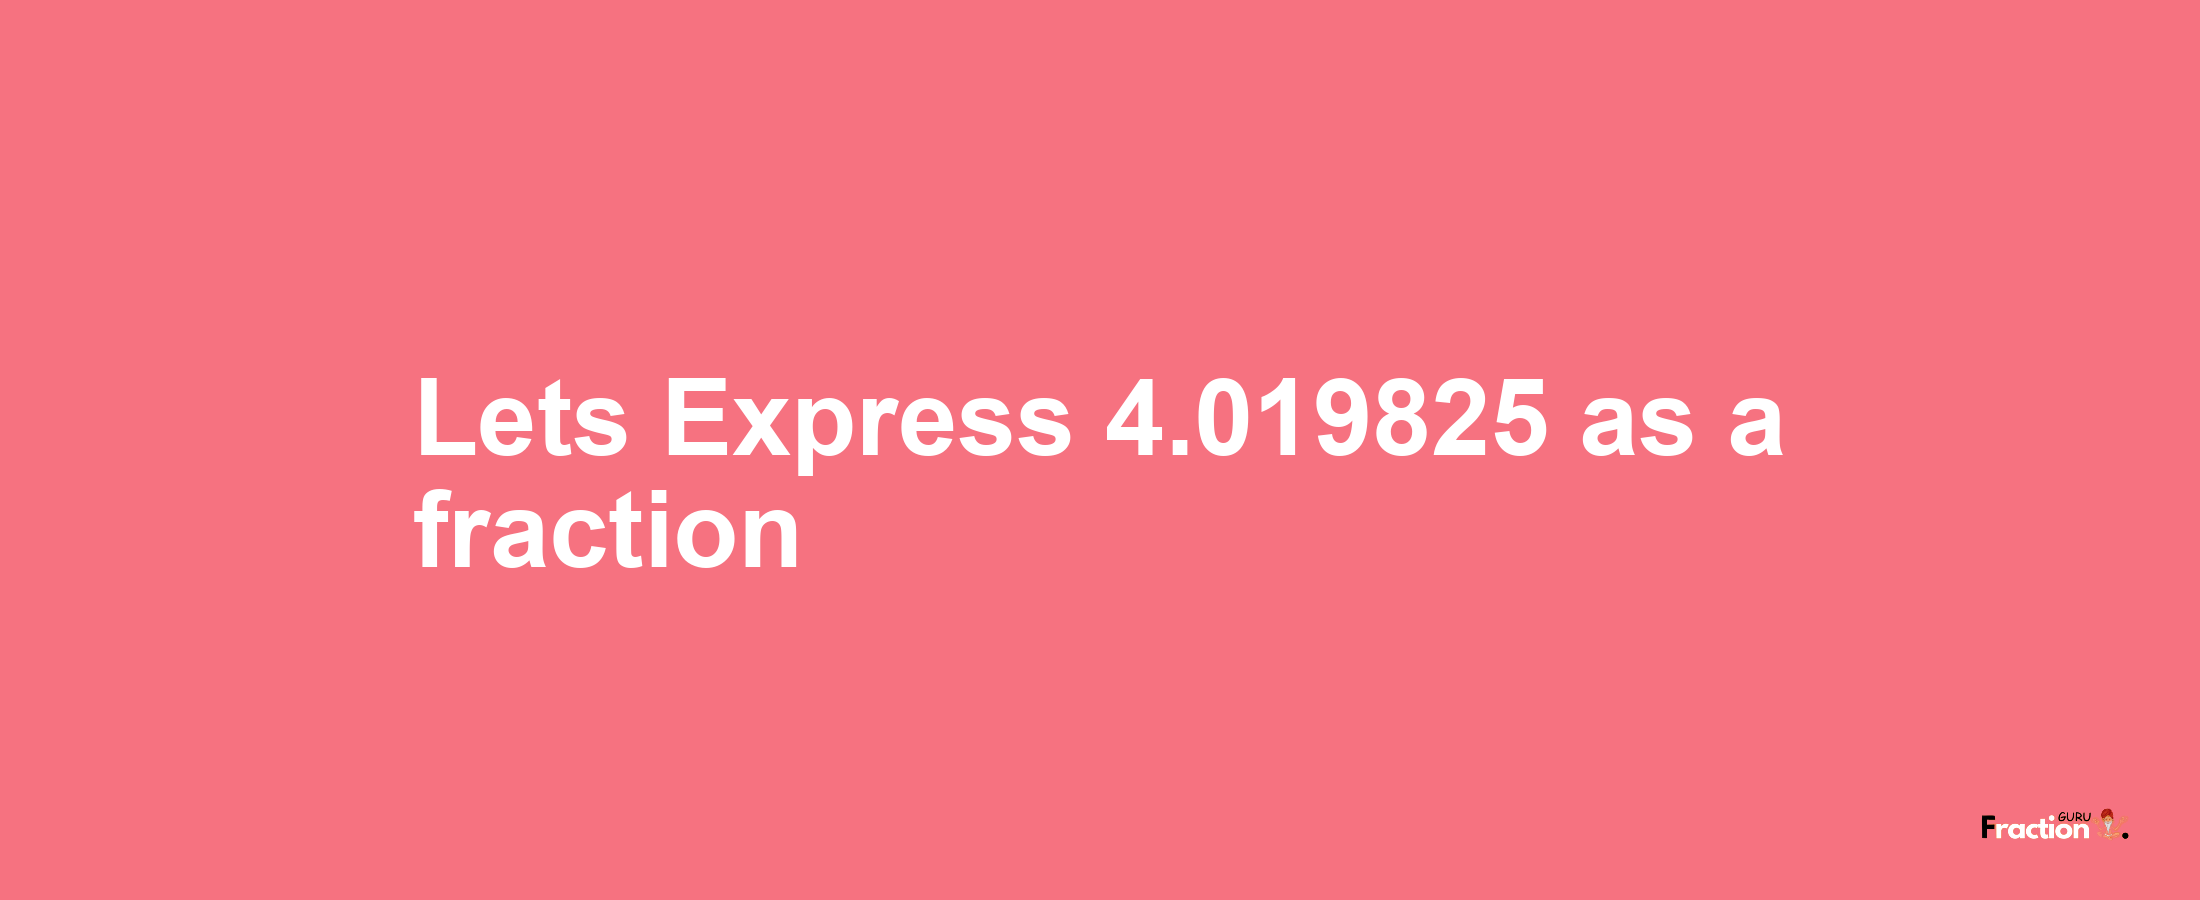 Lets Express 4.019825 as afraction